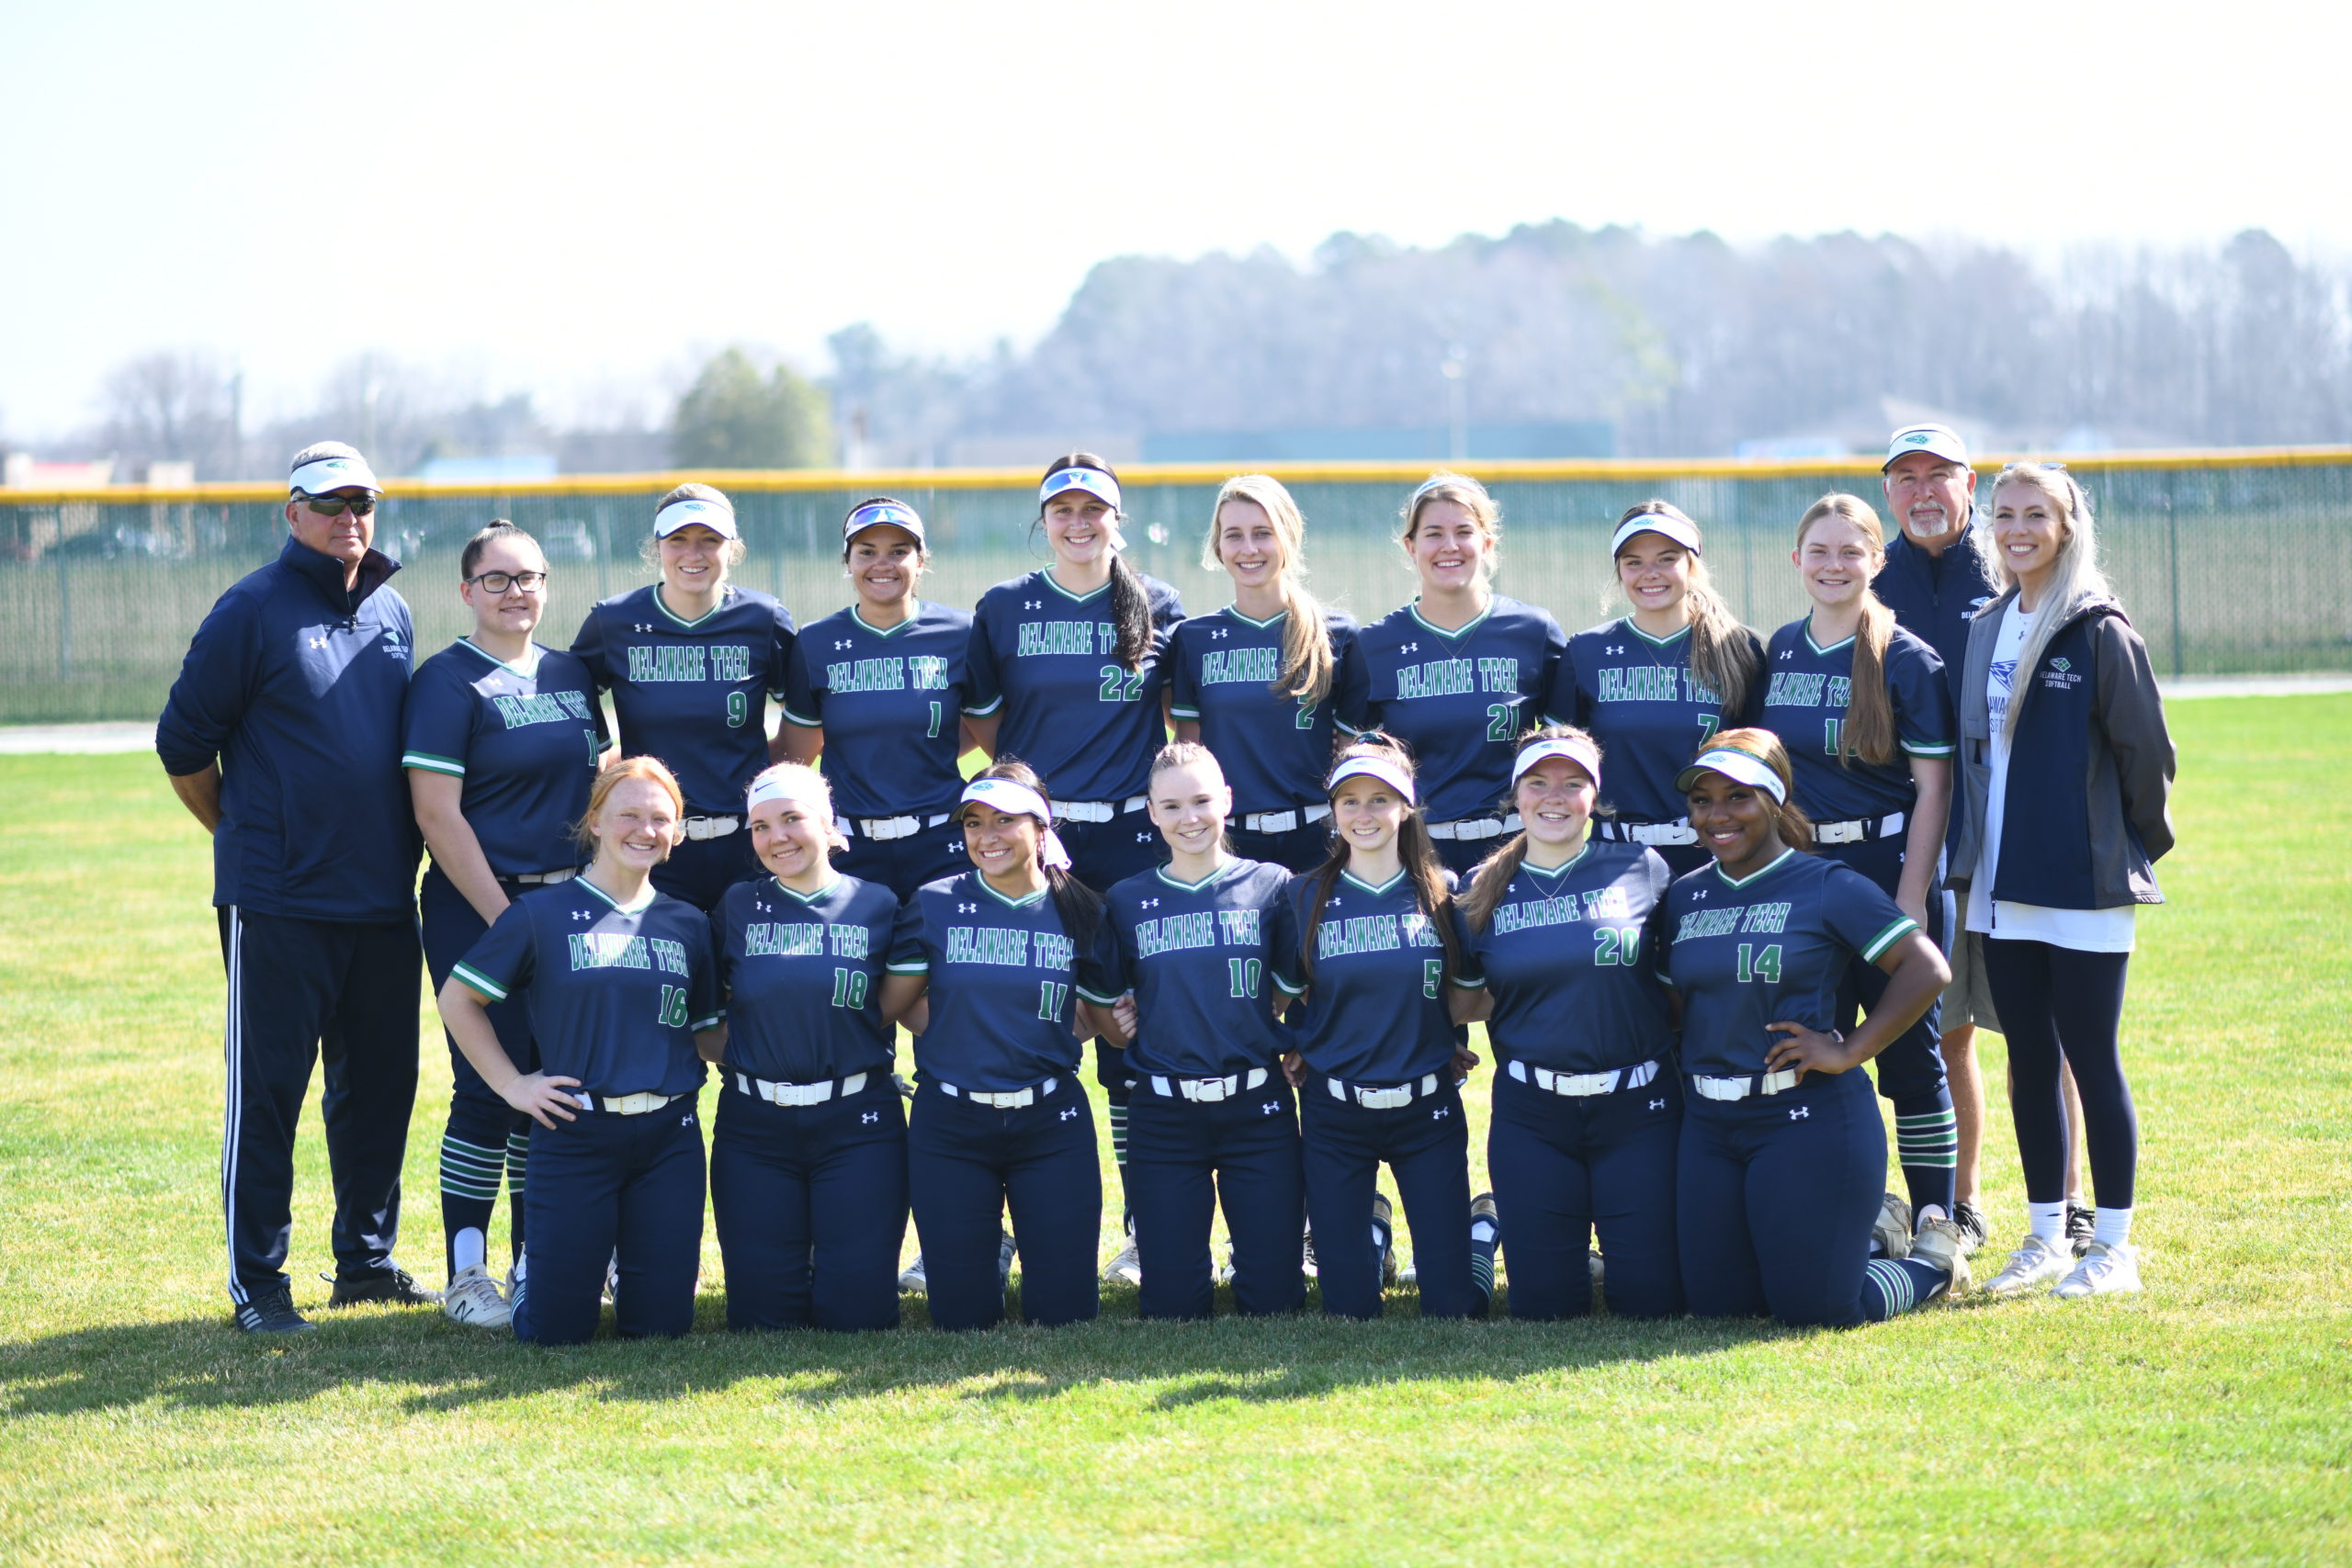 Featured image for “Delaware Tech softball set to host Region 19 tournament as top seed”